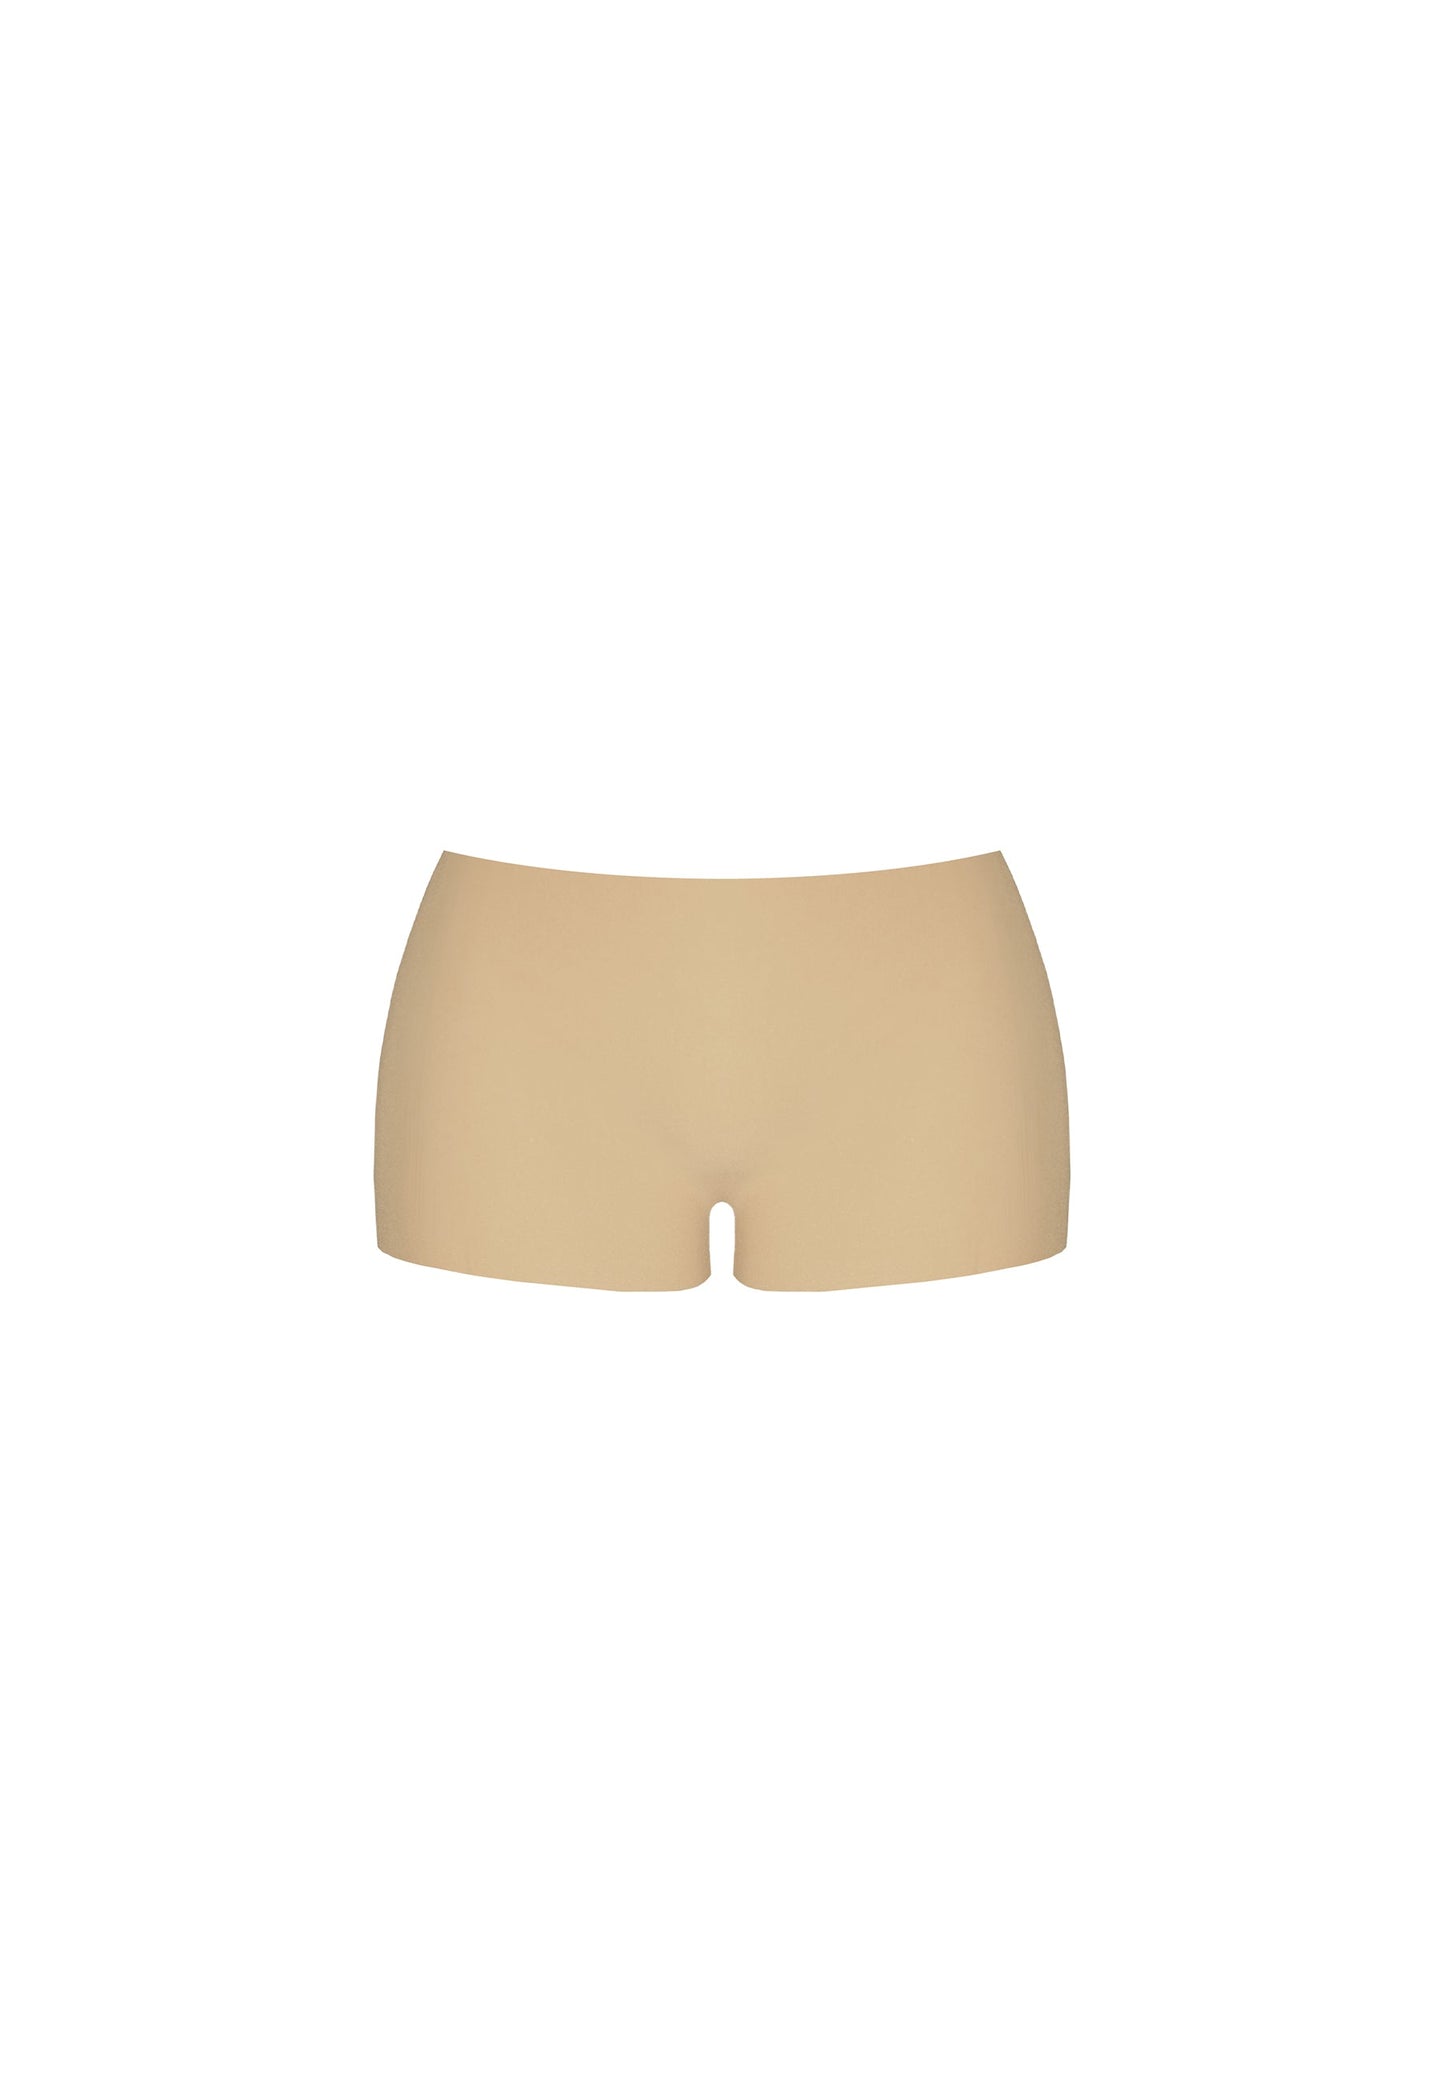 Matching Boy Shorts Taupe (3 for £12*)